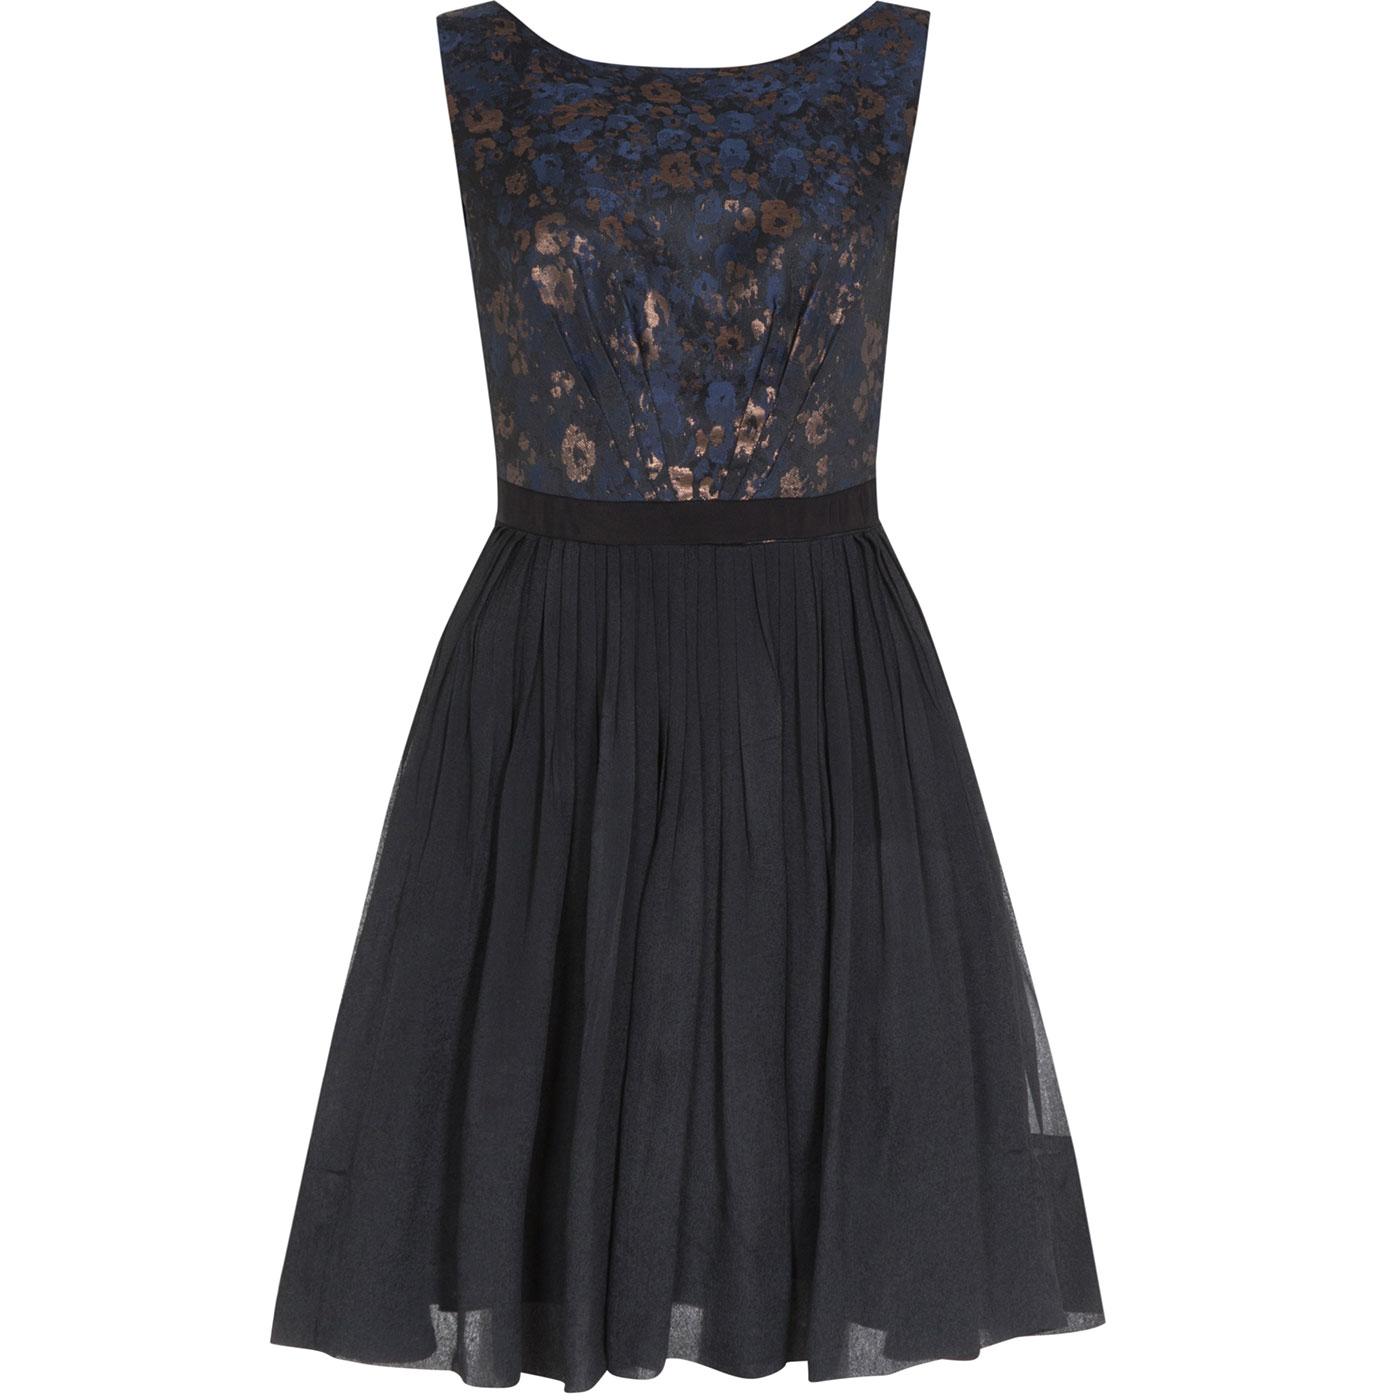 Abigail EMILY AND FIN Retro Floral Jacquard Dress